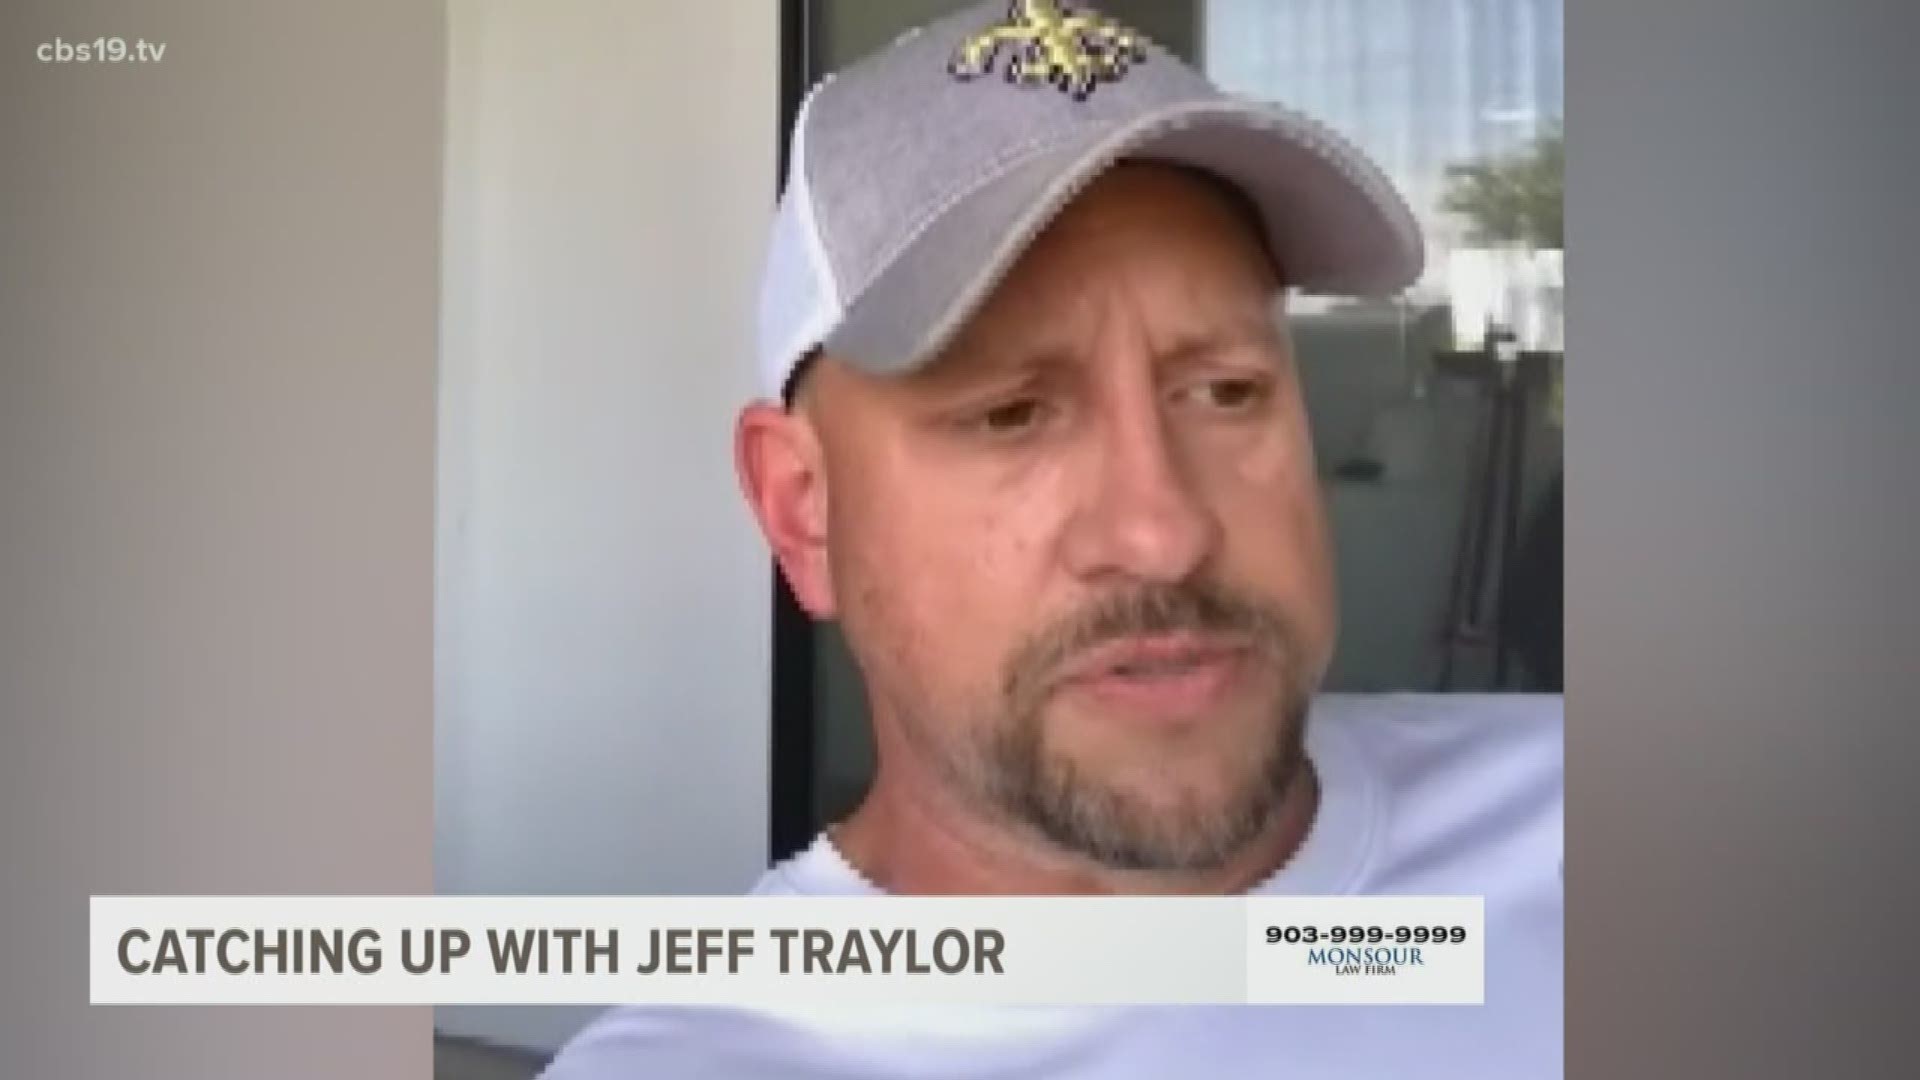 Jeff Traylor took over at UTSA after a successful career as a high school coach in East Texas. He says it is a challenge being a 1st year coach during COVID-19.